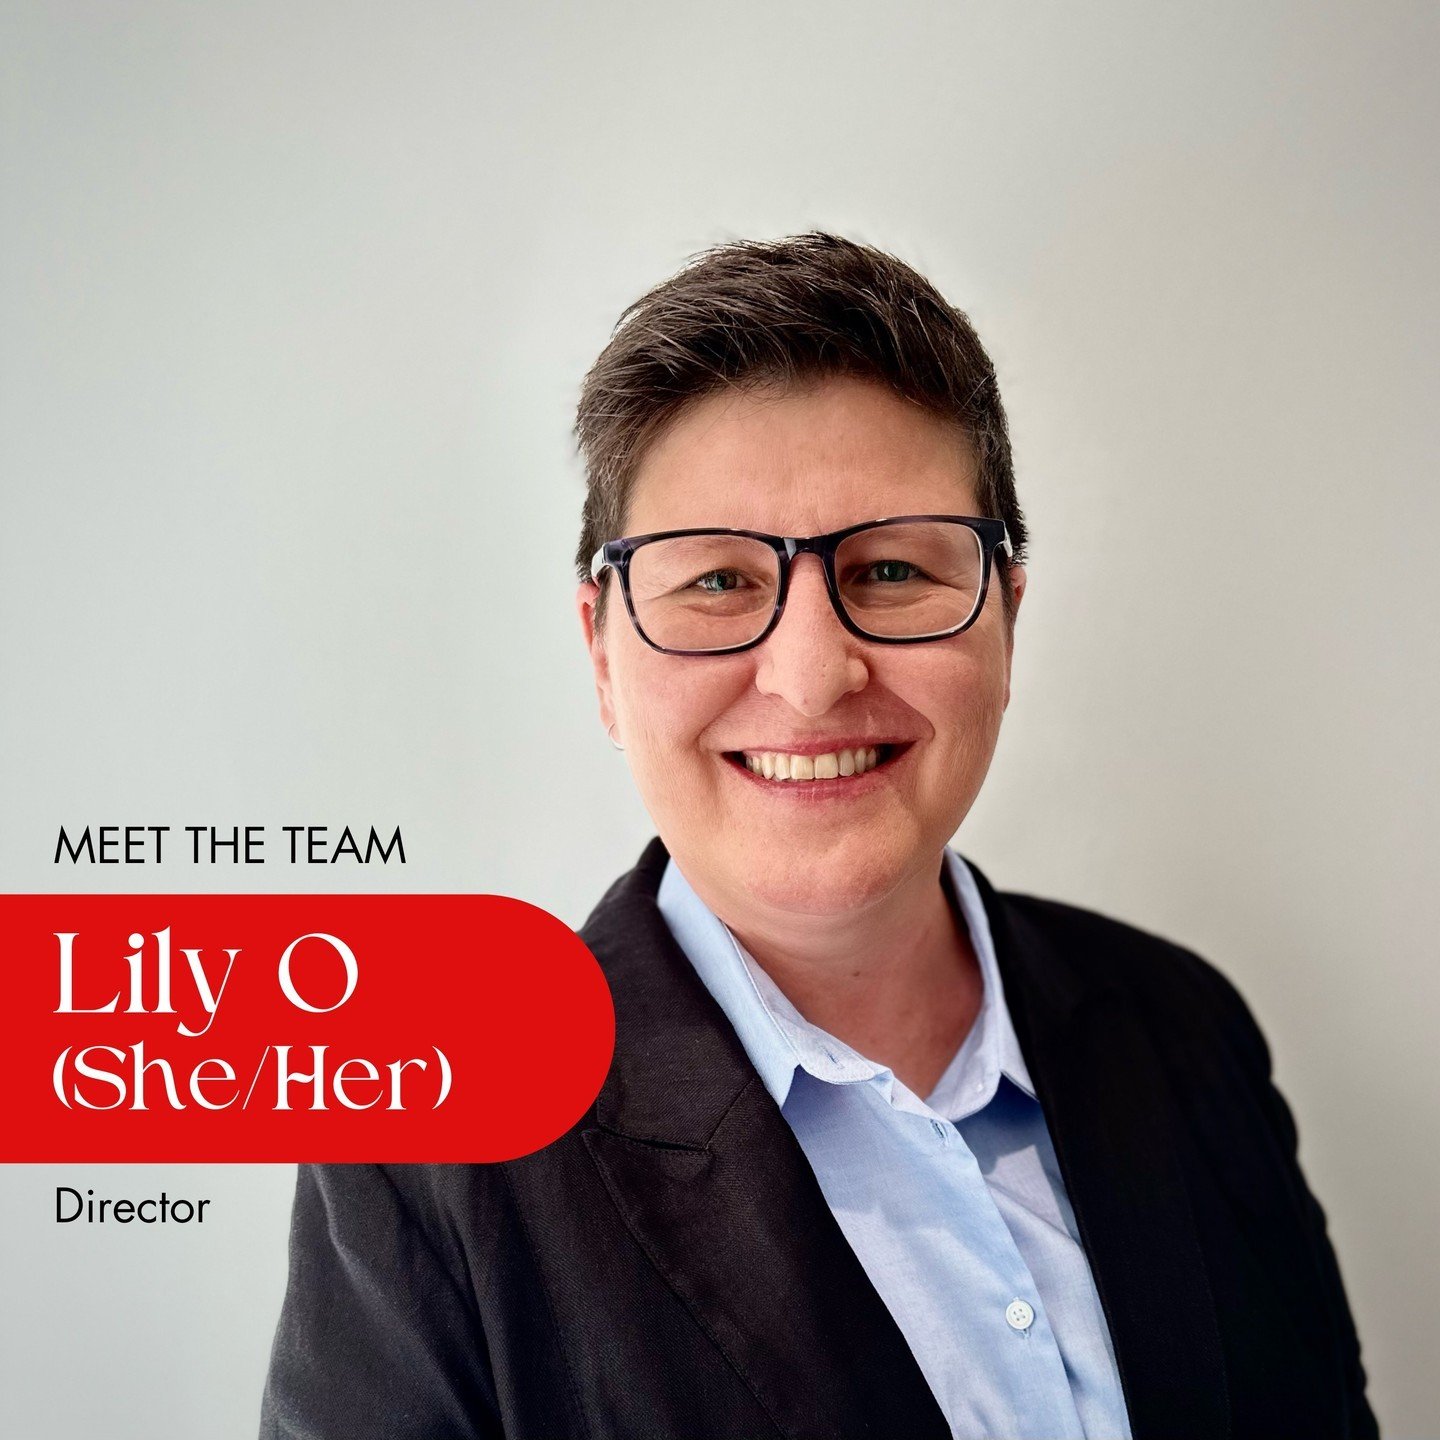 Meet the team- Lily O (She/Her), Director!
Lily is an active member and supporter of the LGBTQIA+ community. She has provided support and leadership to local community groups based in Perth. Encouraging unity, strength and social engagement.

She is 